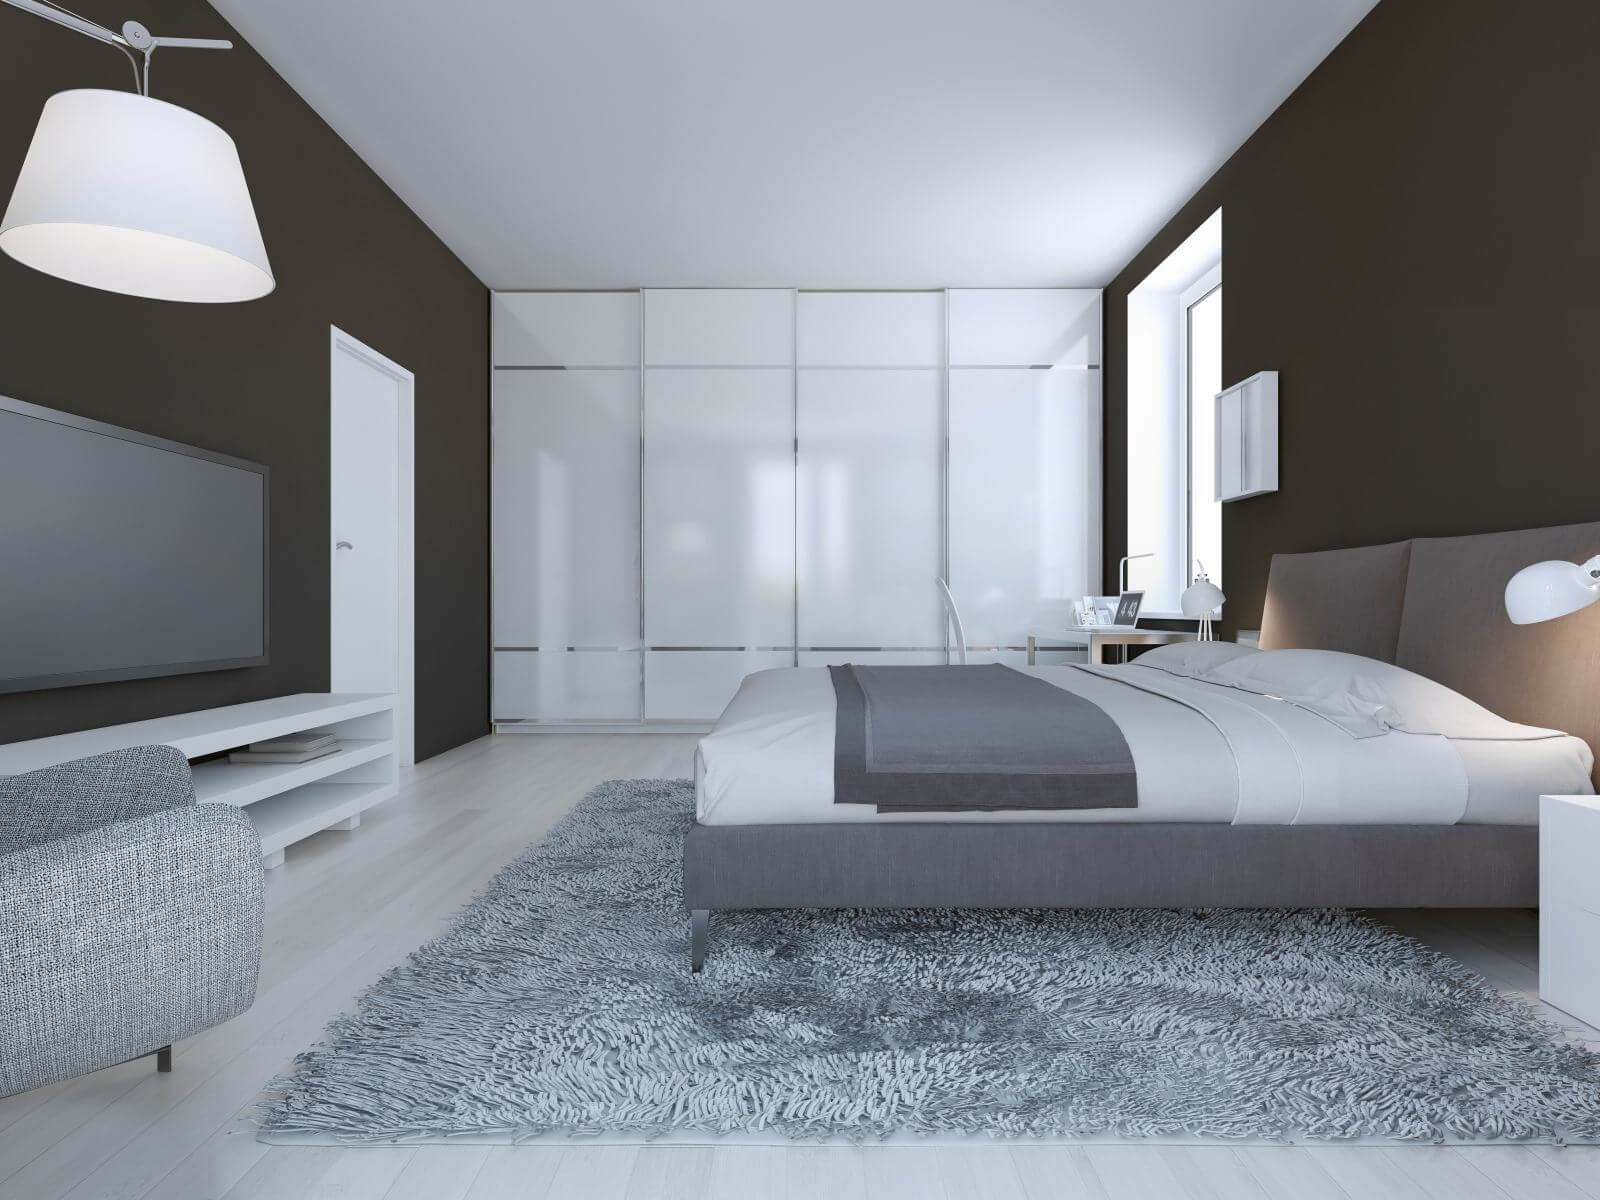 Spacious bedroom minimalist style. Dark brown walls, dressed double bed and large closet with sliding doors. 3D render